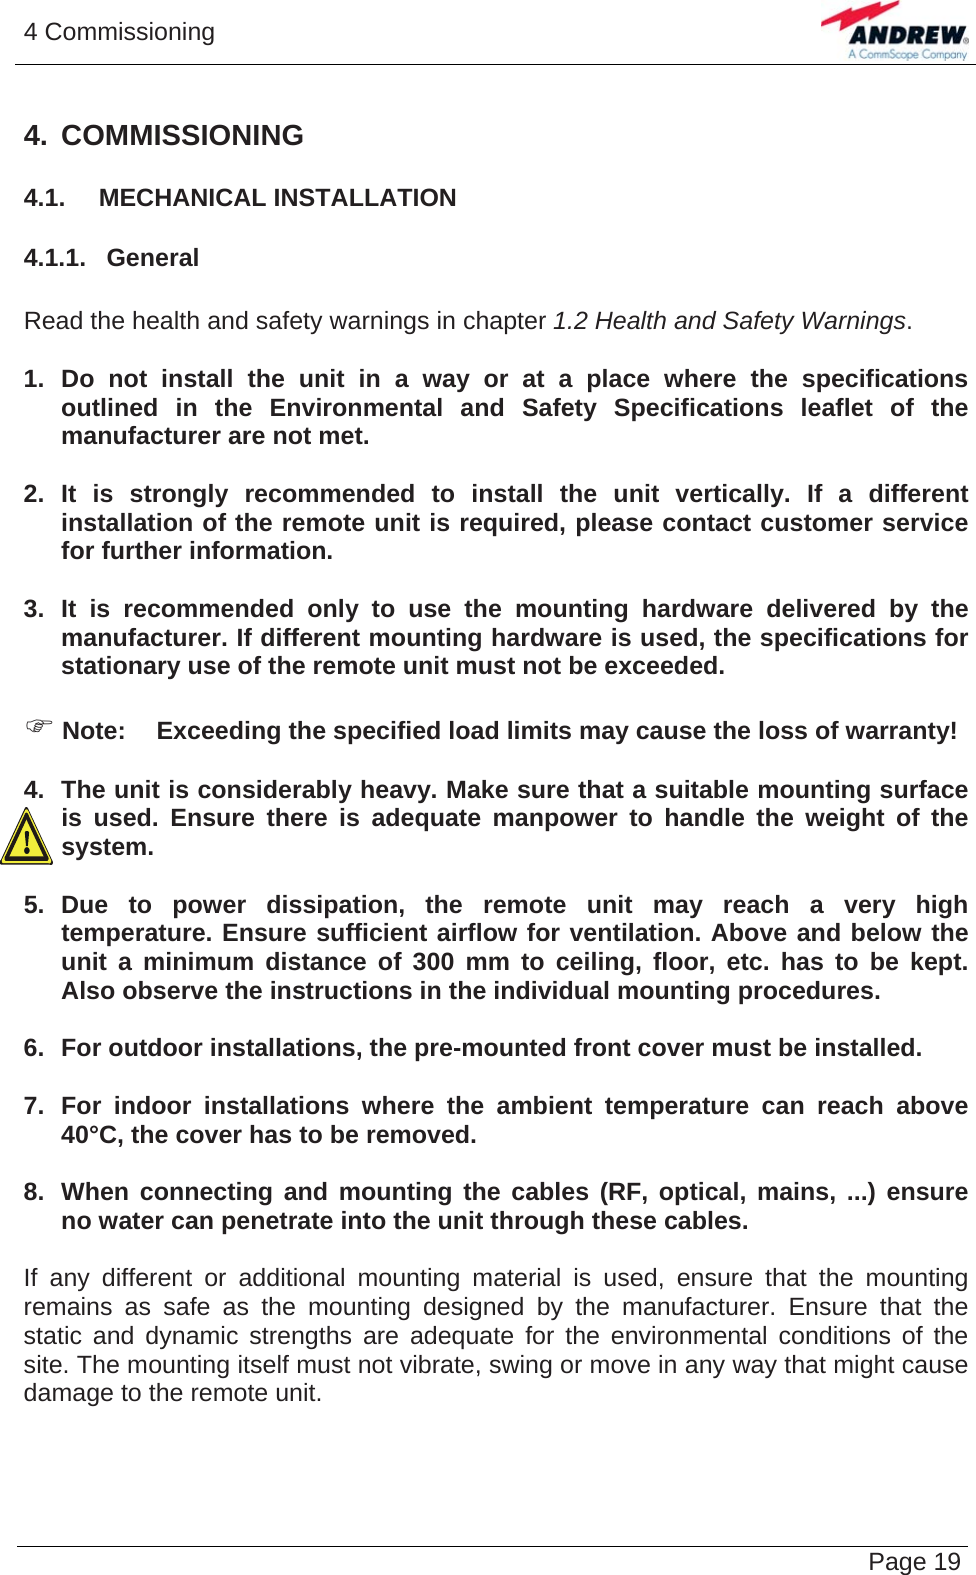 4 Commissioning   Page 194. COMMISSIONING 4.1.  MECHANICAL INSTALLATION 4.1.1.  General  Read the health and safety warnings in chapter 1.2 Health and Safety Warnings.  1. Do not install the unit in a way or at a place where the specifications outlined in the Environmental and Safety Specifications leaflet of the manufacturer are not met.  2. It is strongly recommended to install the unit vertically. If a different installation of the remote unit is required, please contact customer service for further information.  3. It is recommended only to use the mounting hardware delivered by the manufacturer. If different mounting hardware is used, the specifications for stationary use of the remote unit must not be exceeded.  ) Note:  Exceeding the specified load limits may cause the loss of warranty!  4.  The unit is considerably heavy. Make sure that a suitable mounting surface is used. Ensure there is adequate manpower to handle the weight of the system.  5. Due to power dissipation, the remote unit may reach a very high temperature. Ensure sufficient airflow for ventilation. Above and below the unit a minimum distance of 300 mm to ceiling, floor, etc. has to be kept. Also observe the instructions in the individual mounting procedures.  6.  For outdoor installations, the pre-mounted front cover must be installed.  7.  For indoor installations where the ambient temperature can reach above 40°C, the cover has to be removed.  8.  When connecting and mounting the cables (RF, optical, mains, ...) ensure no water can penetrate into the unit through these cables.  If any different or additional mounting material is used, ensure that the mounting remains as safe as the mounting designed by the manufacturer. Ensure that the static and dynamic strengths are adequate for the environmental conditions of the site. The mounting itself must not vibrate, swing or move in any way that might cause damage to the remote unit.   